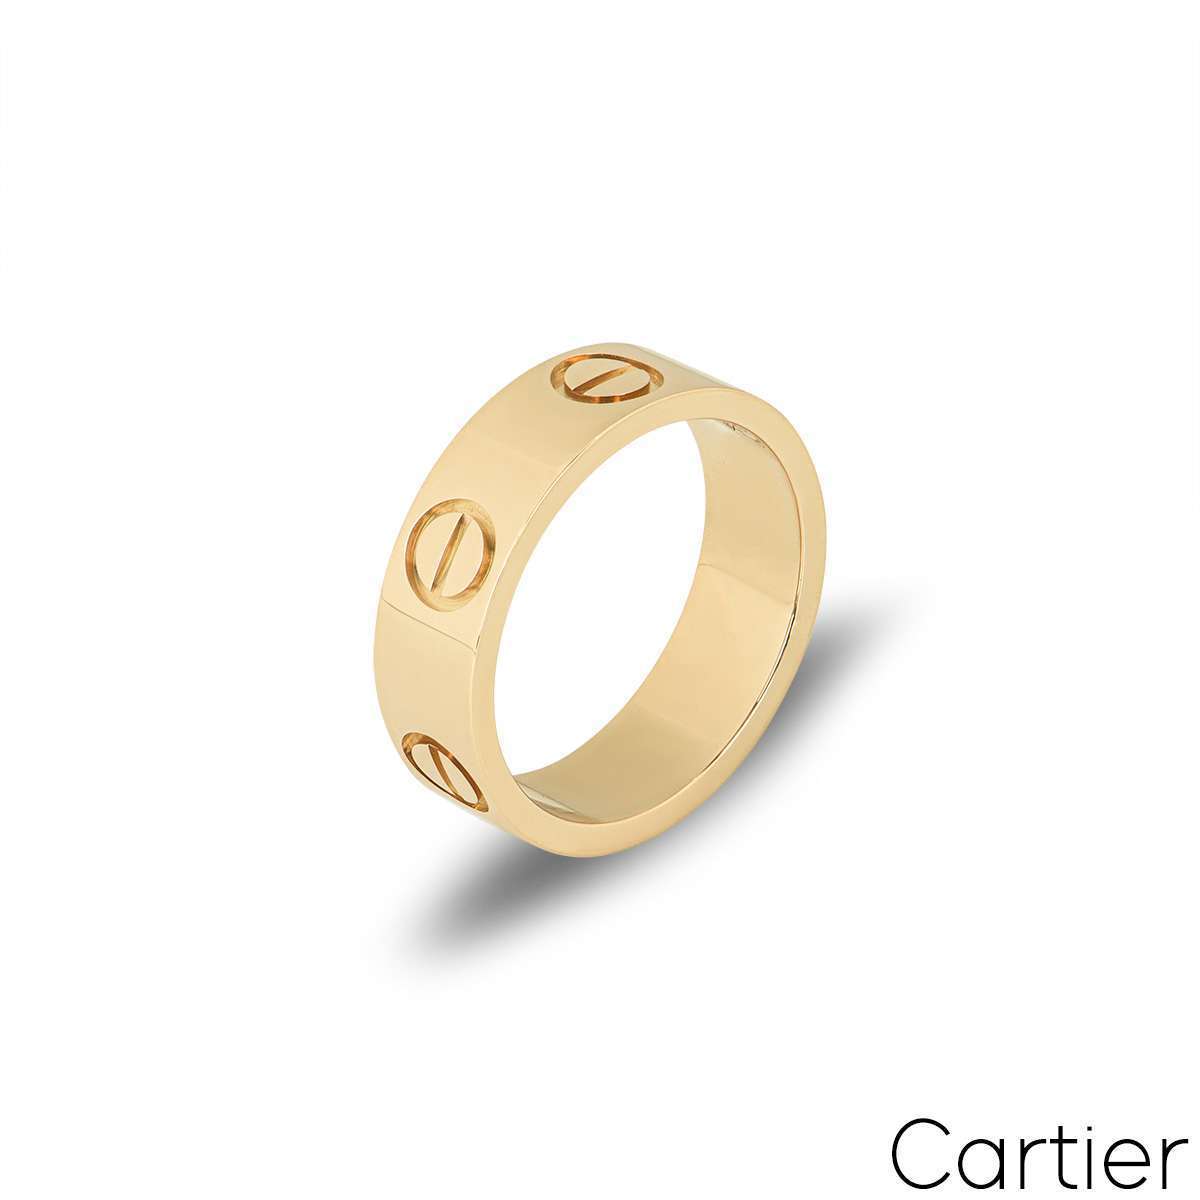 Cartier Yellow Gold Love Ring Size 57 B4084600